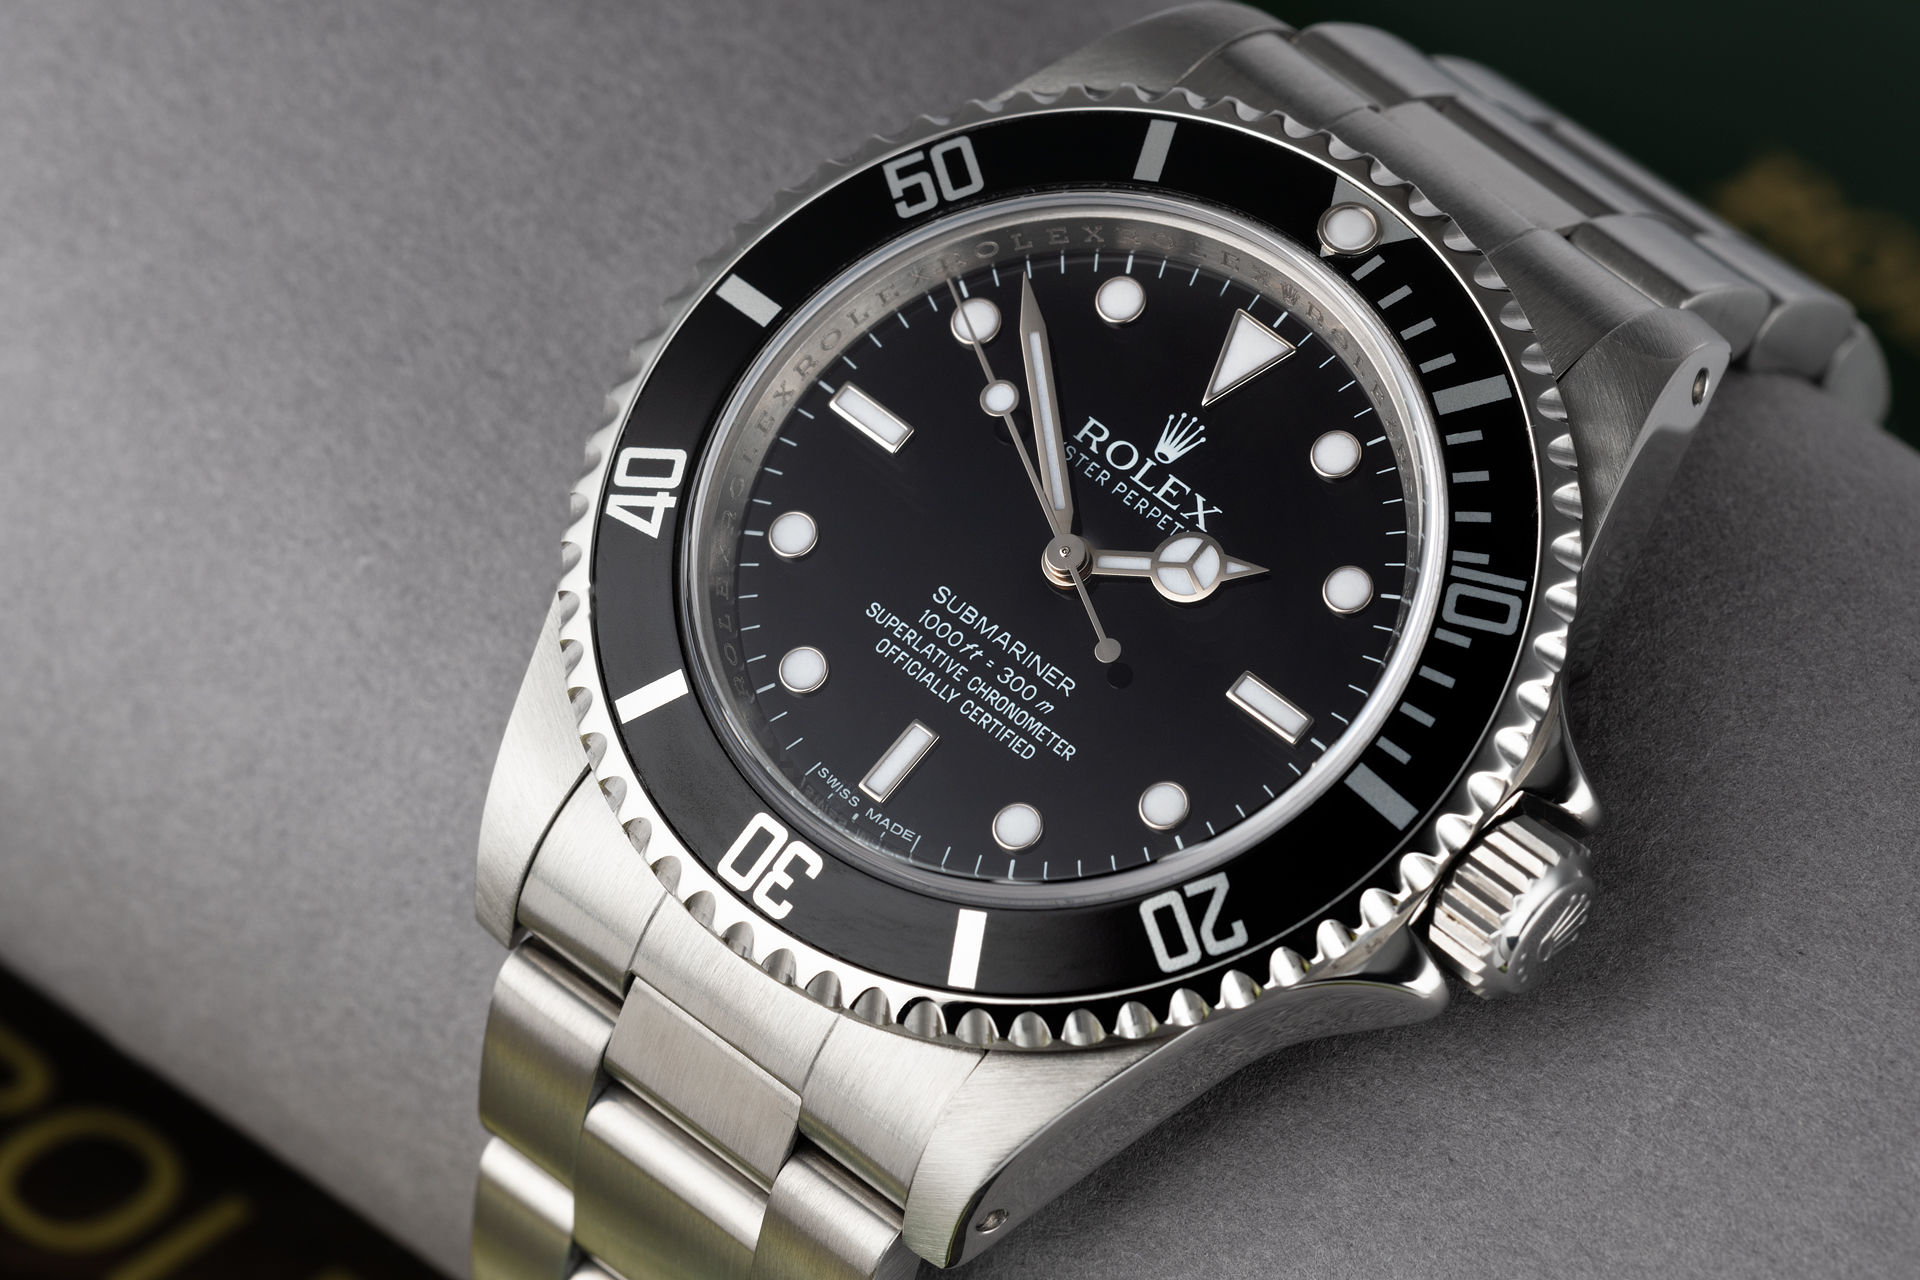 Rolex Submariner Watches | ref 14060M 'COSC Dial' Full Set | The Watch